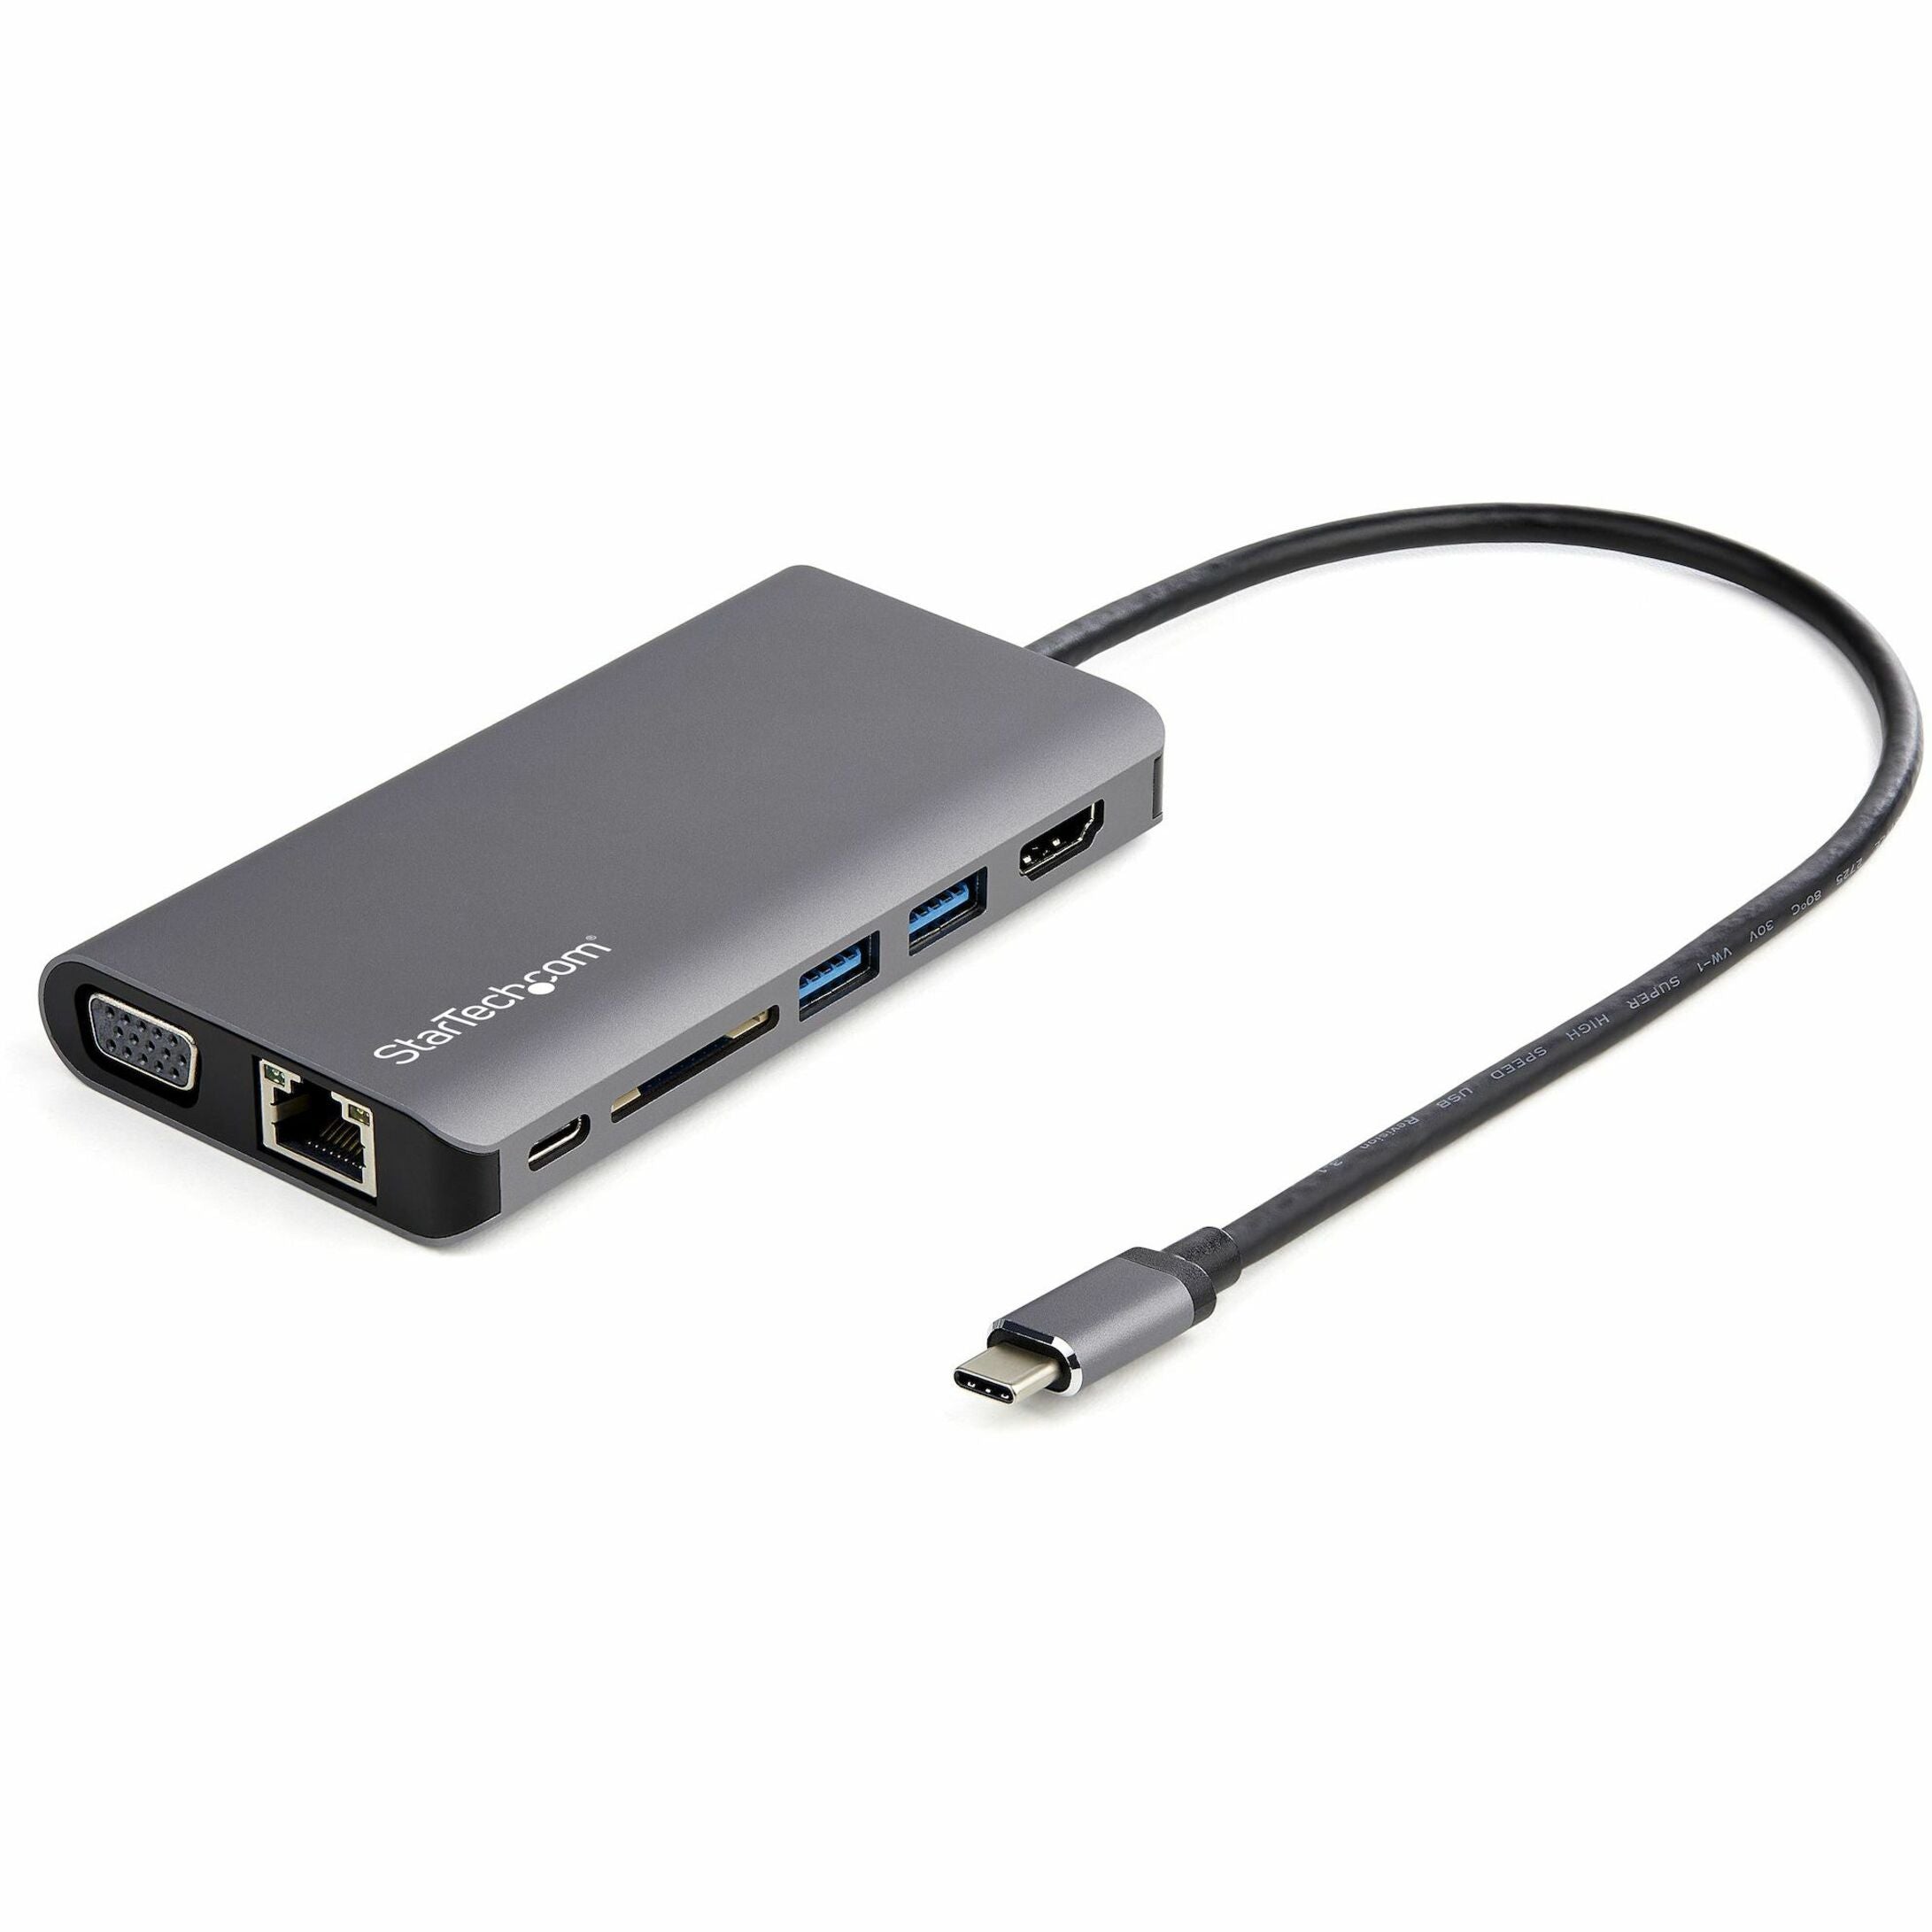 StarTech.com DKT30CHVAUSP USB-C Multiport Adapter with HDMI or VGA - Attached 30 cm Host Cable - 1x USB-C and 2x USB-A - 100W PD includes PD Passthrough - SD Card Reader - USB Type-C Mini Dock